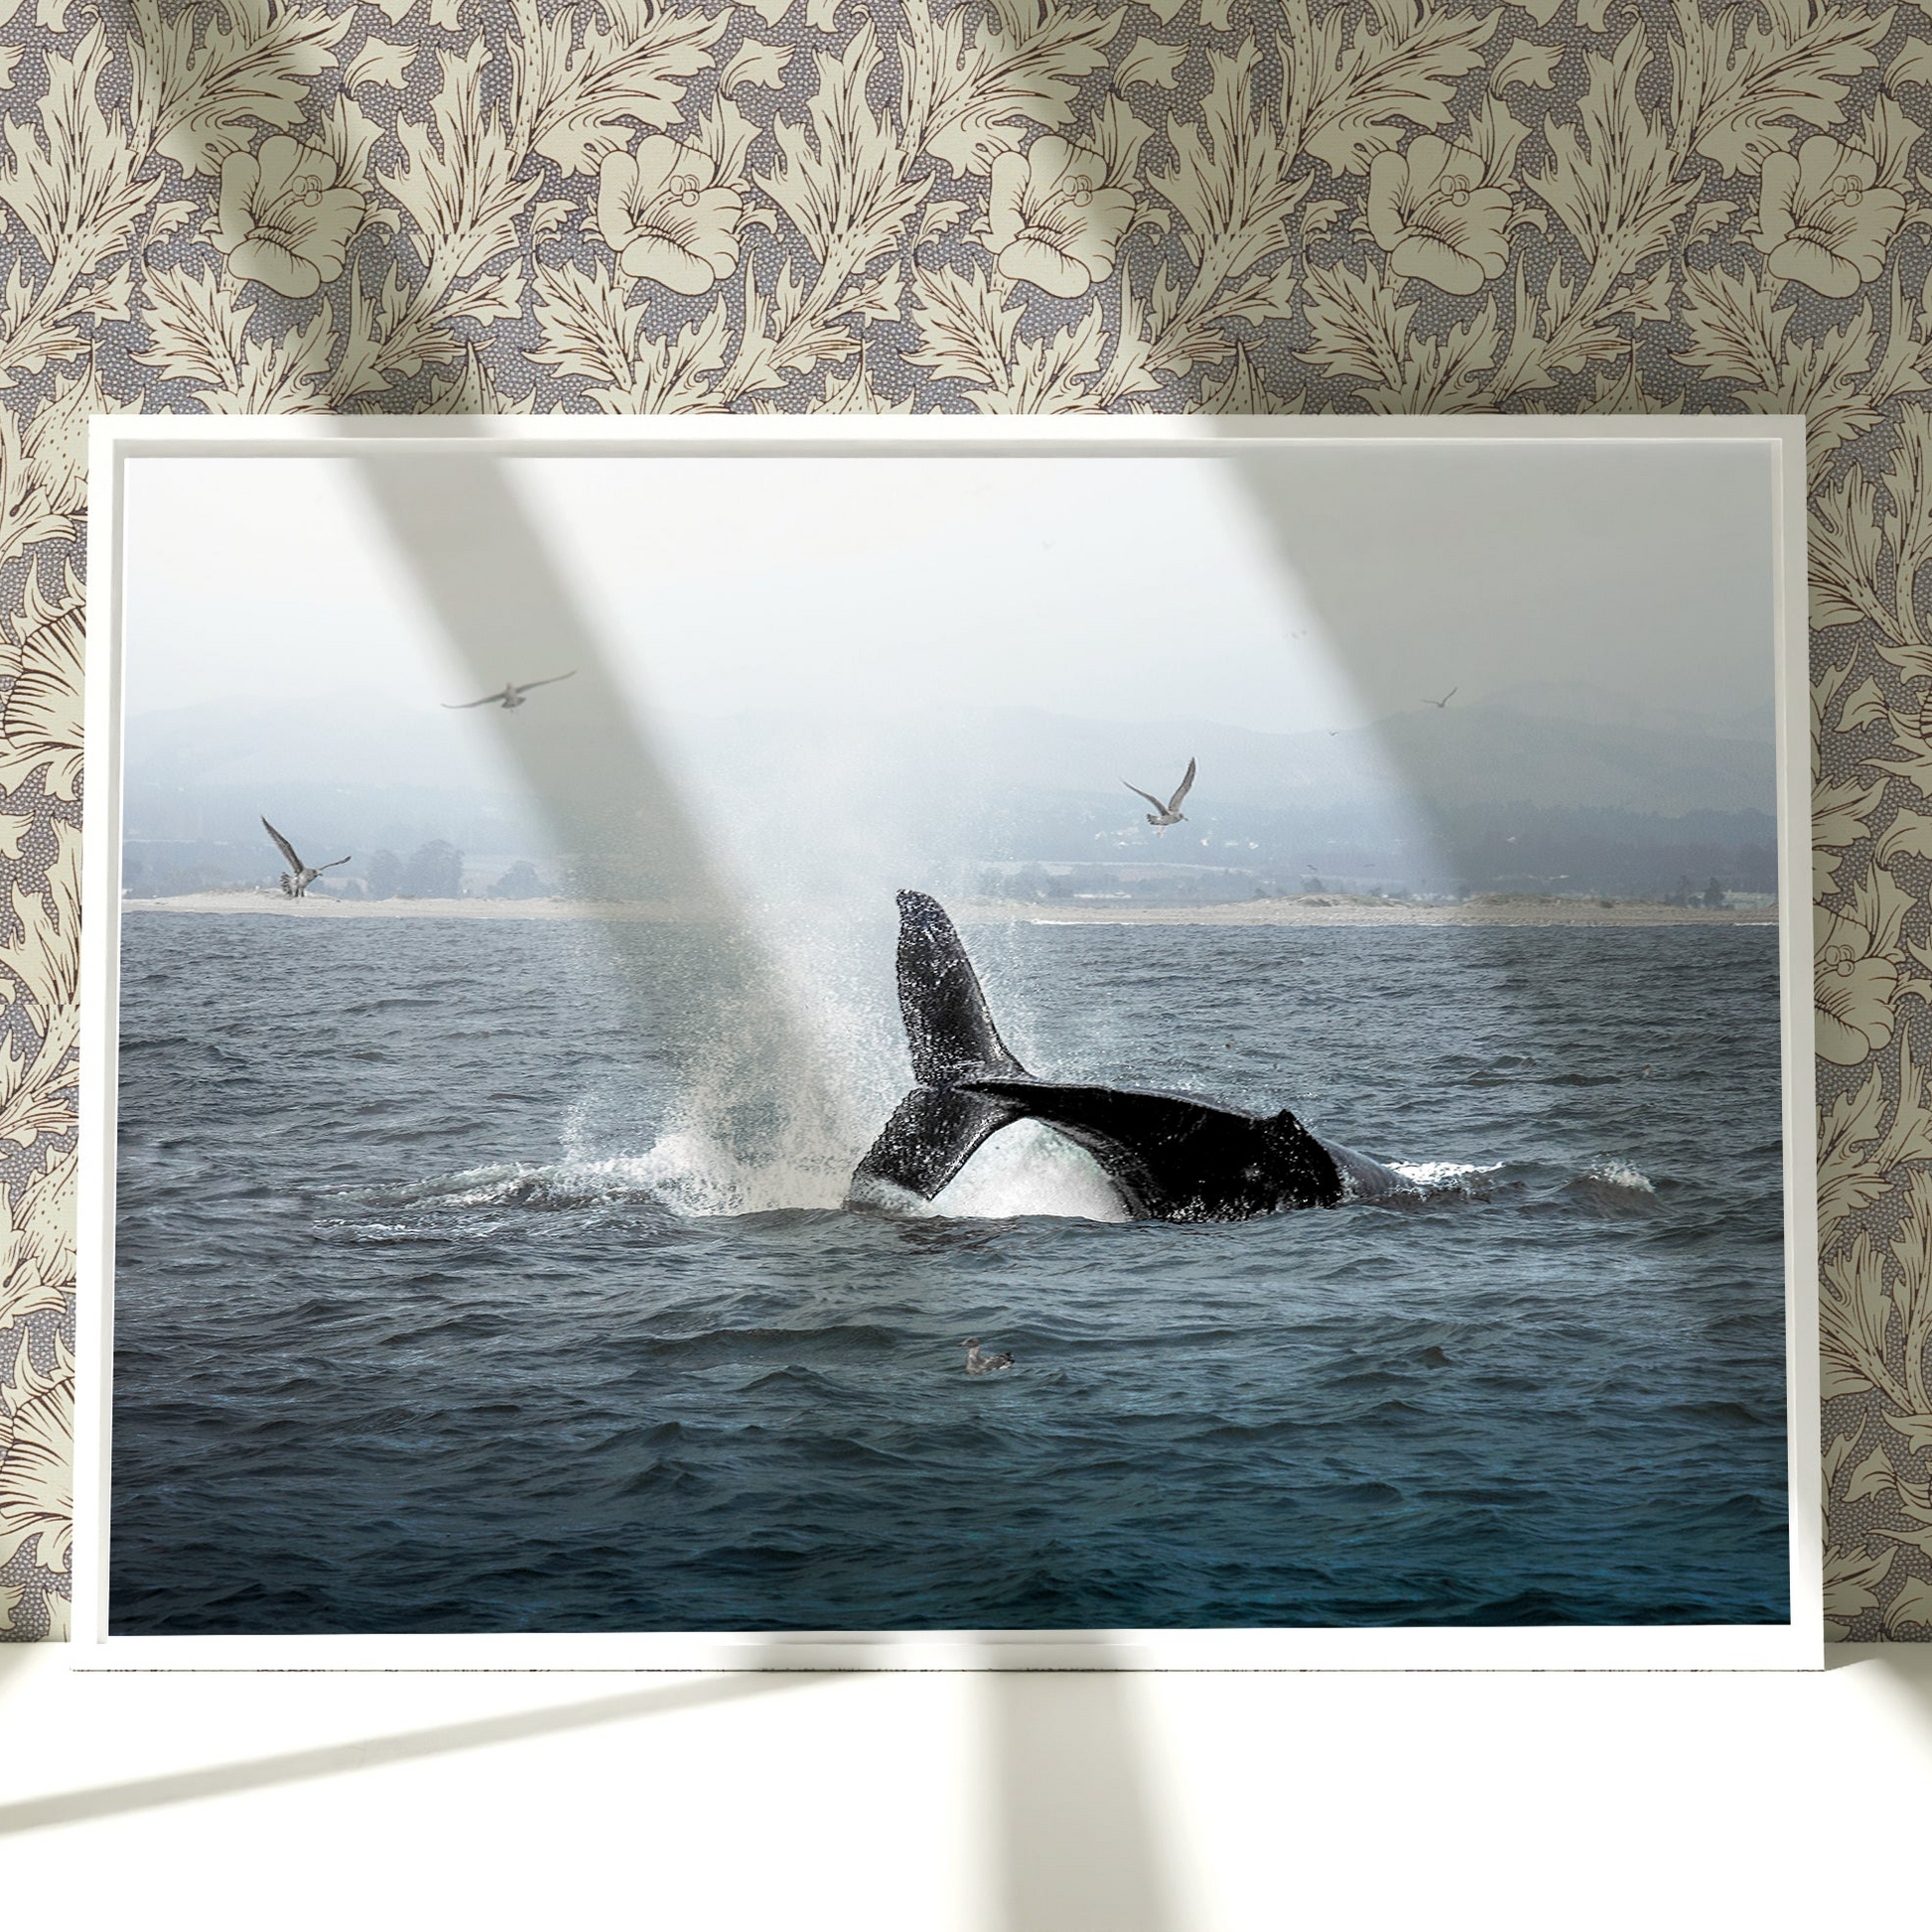 a picture of a whale jumping out of the water